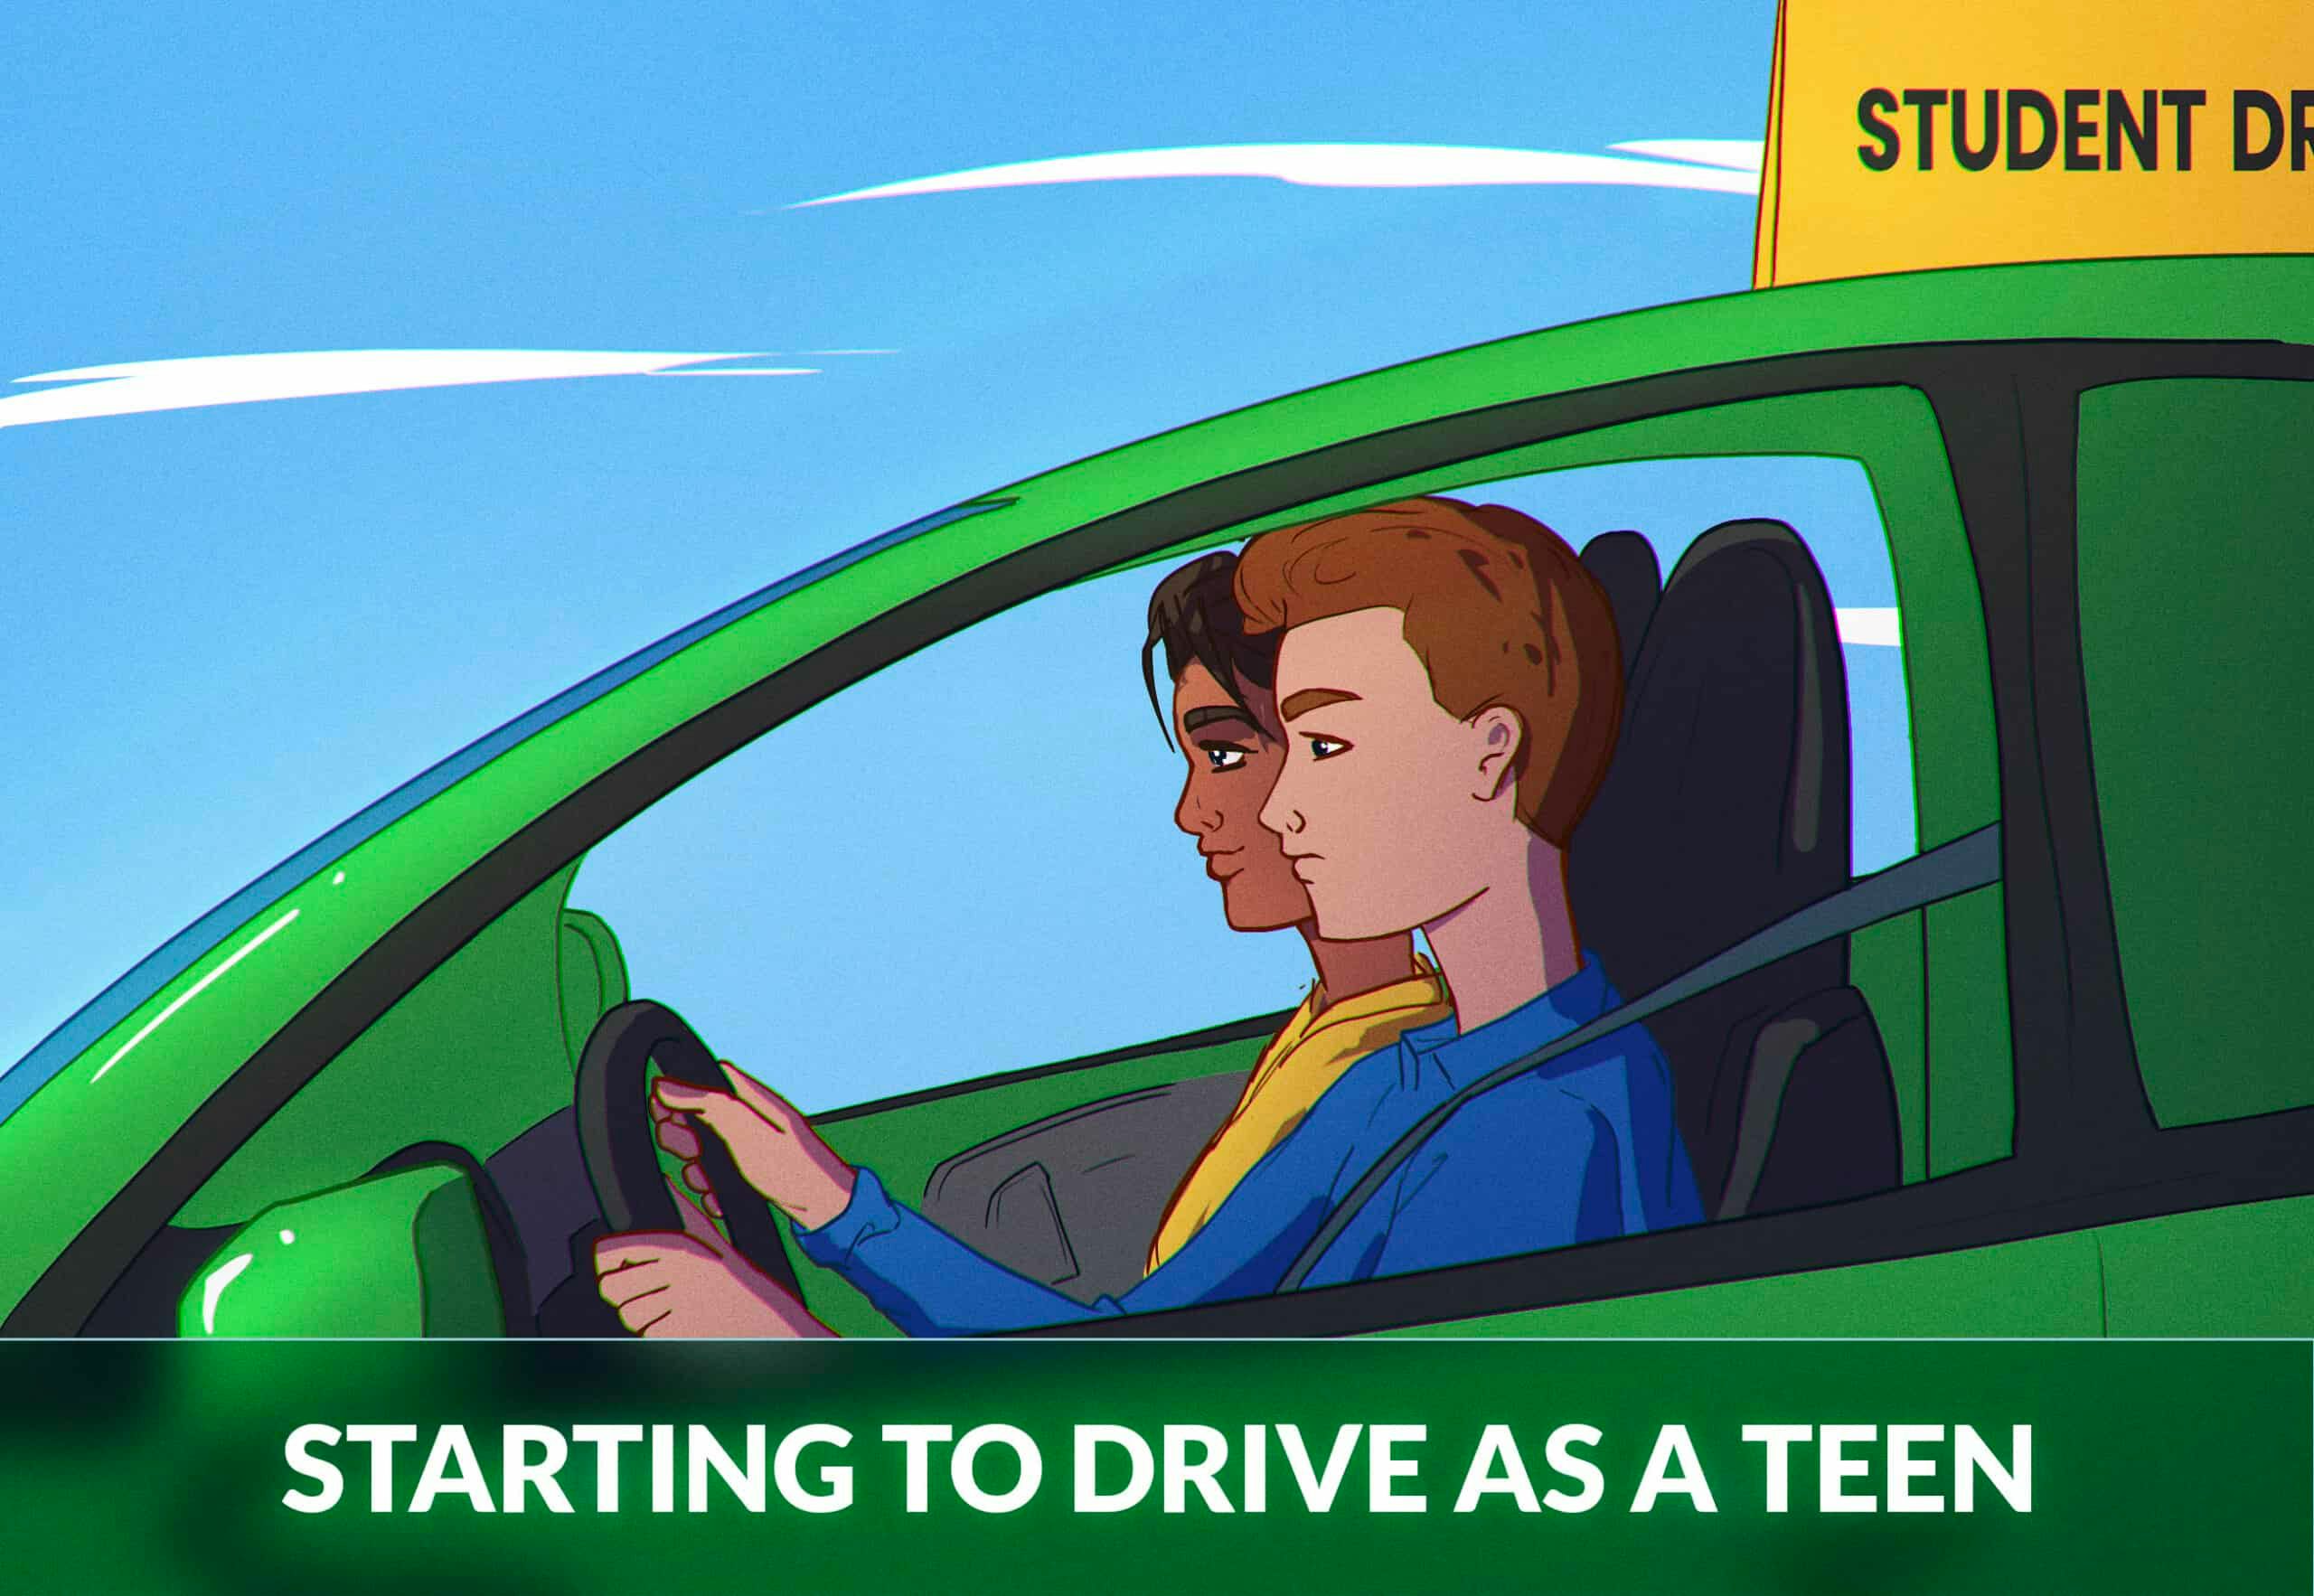 Starting to drive as a teen